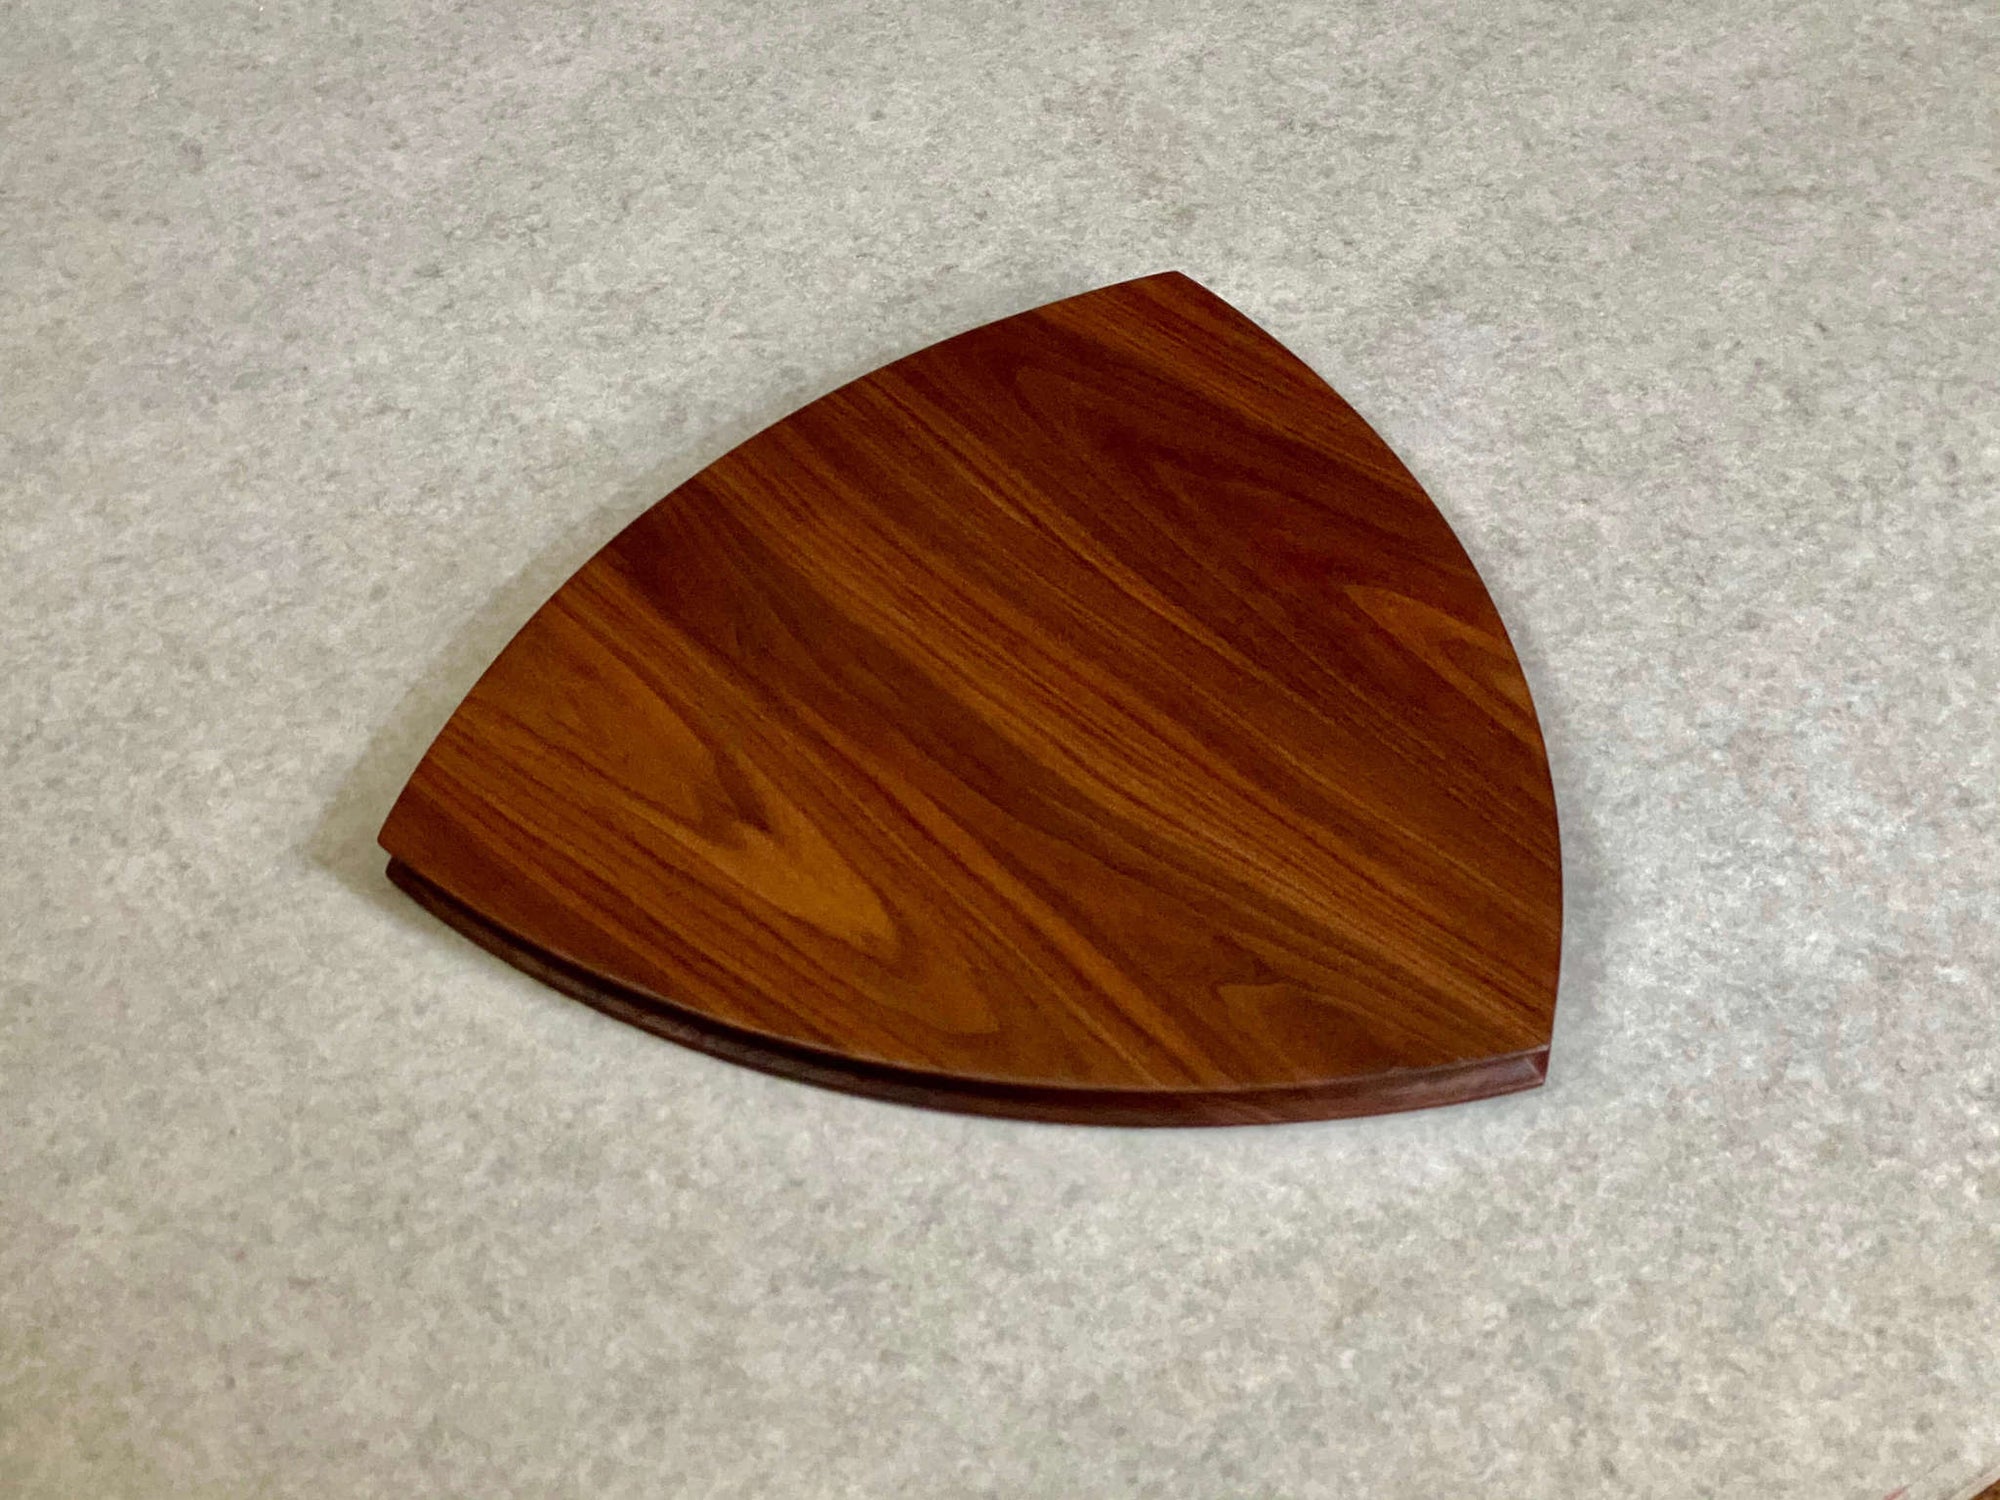 A rounded triangular shaped cutting and serving board in mahogany. Sculpted edges provide a nice detail.